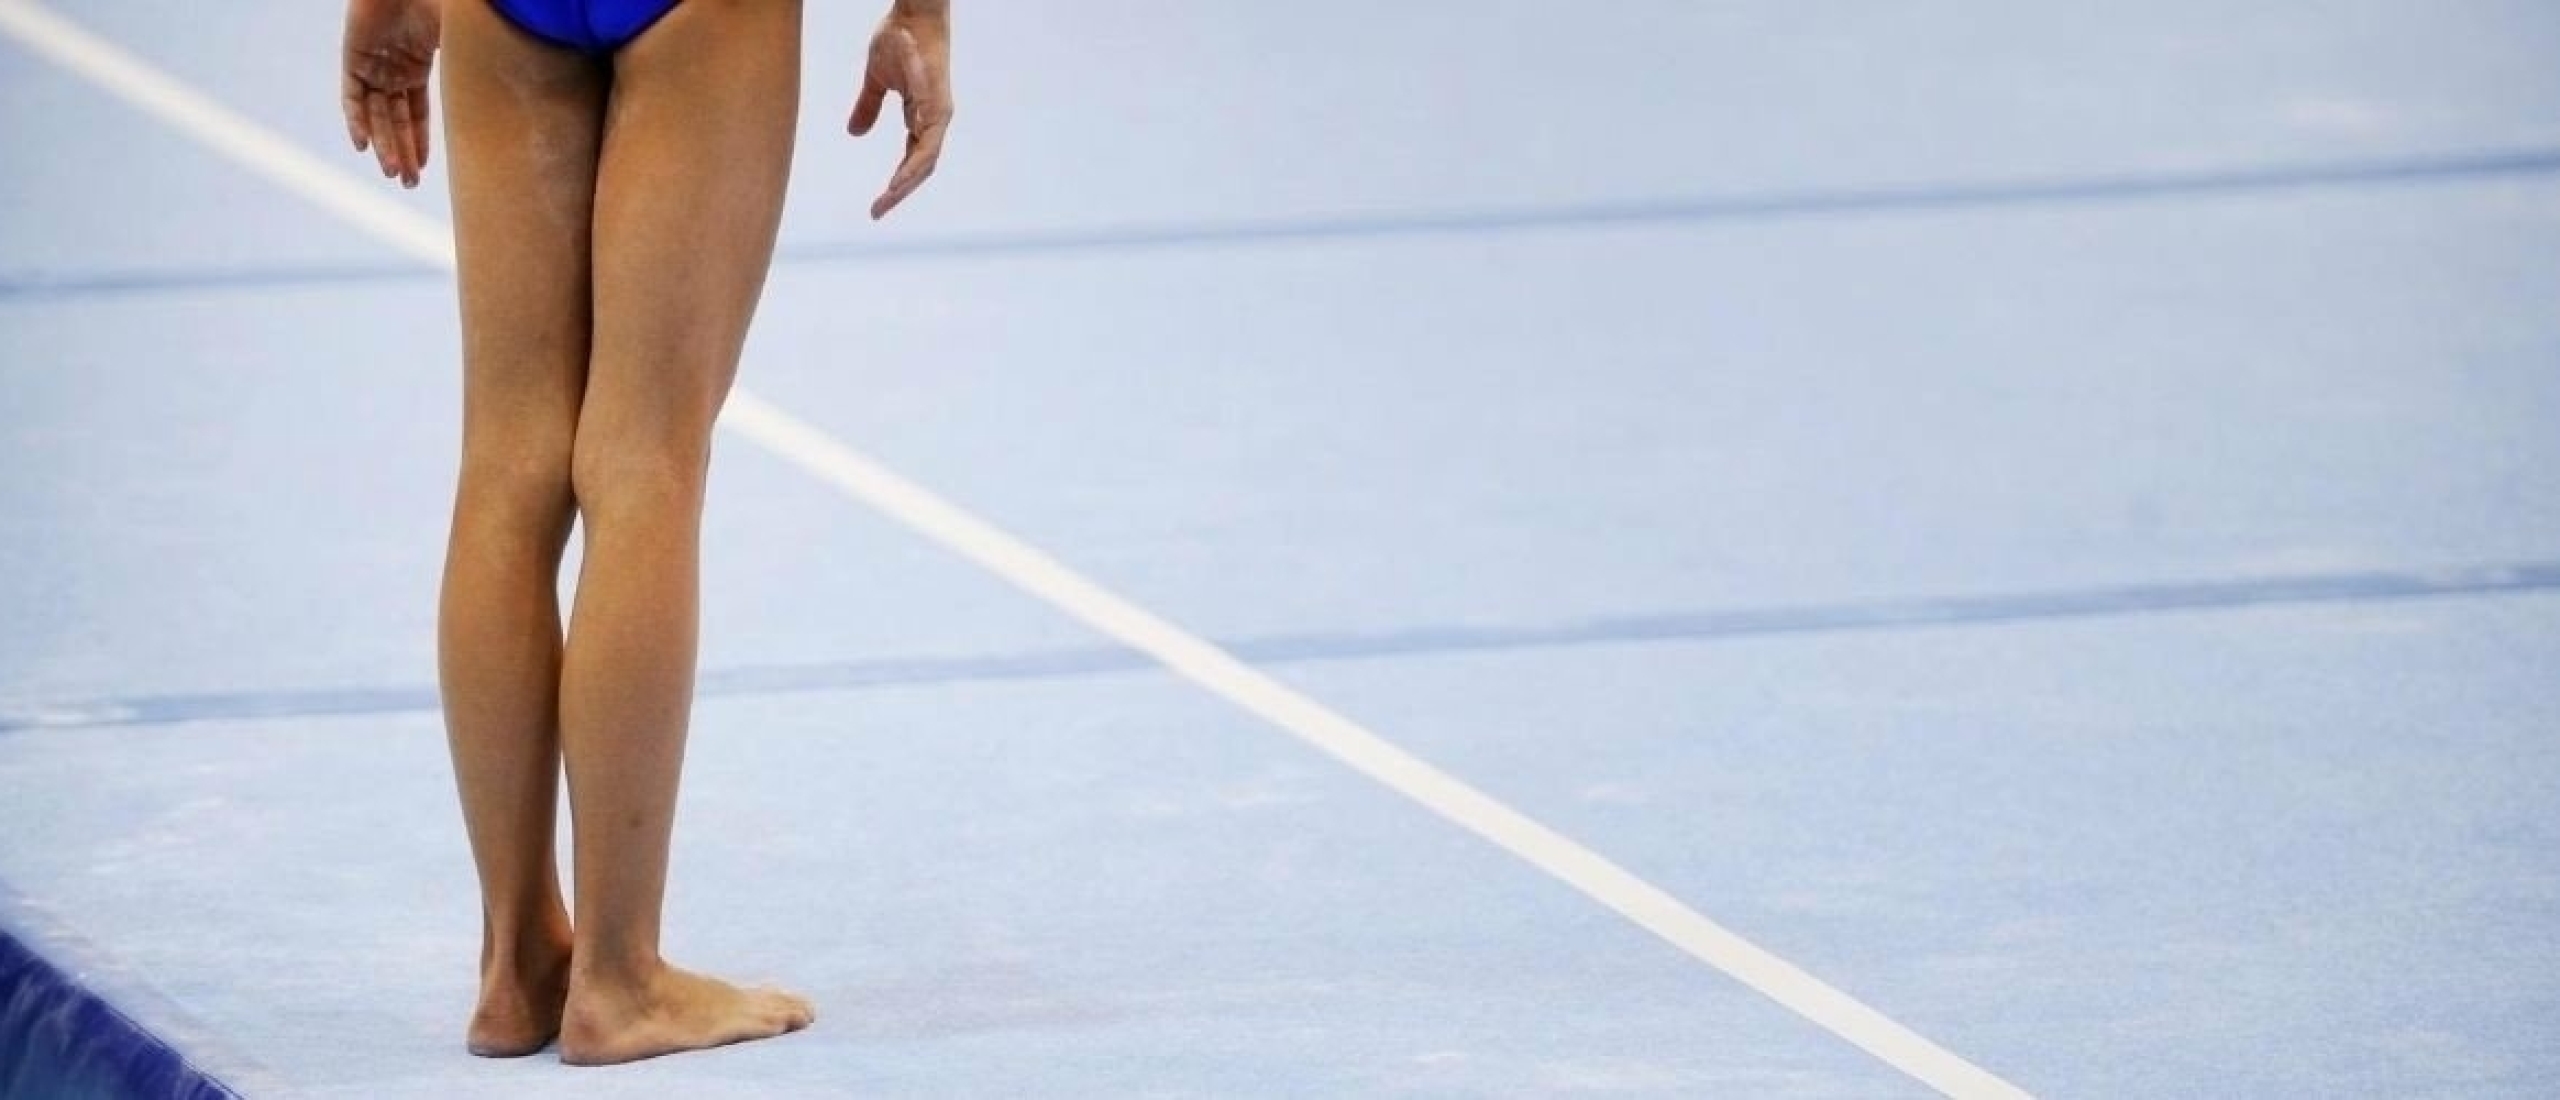 Your own floor exercise in gymnastics; what do you need to know?